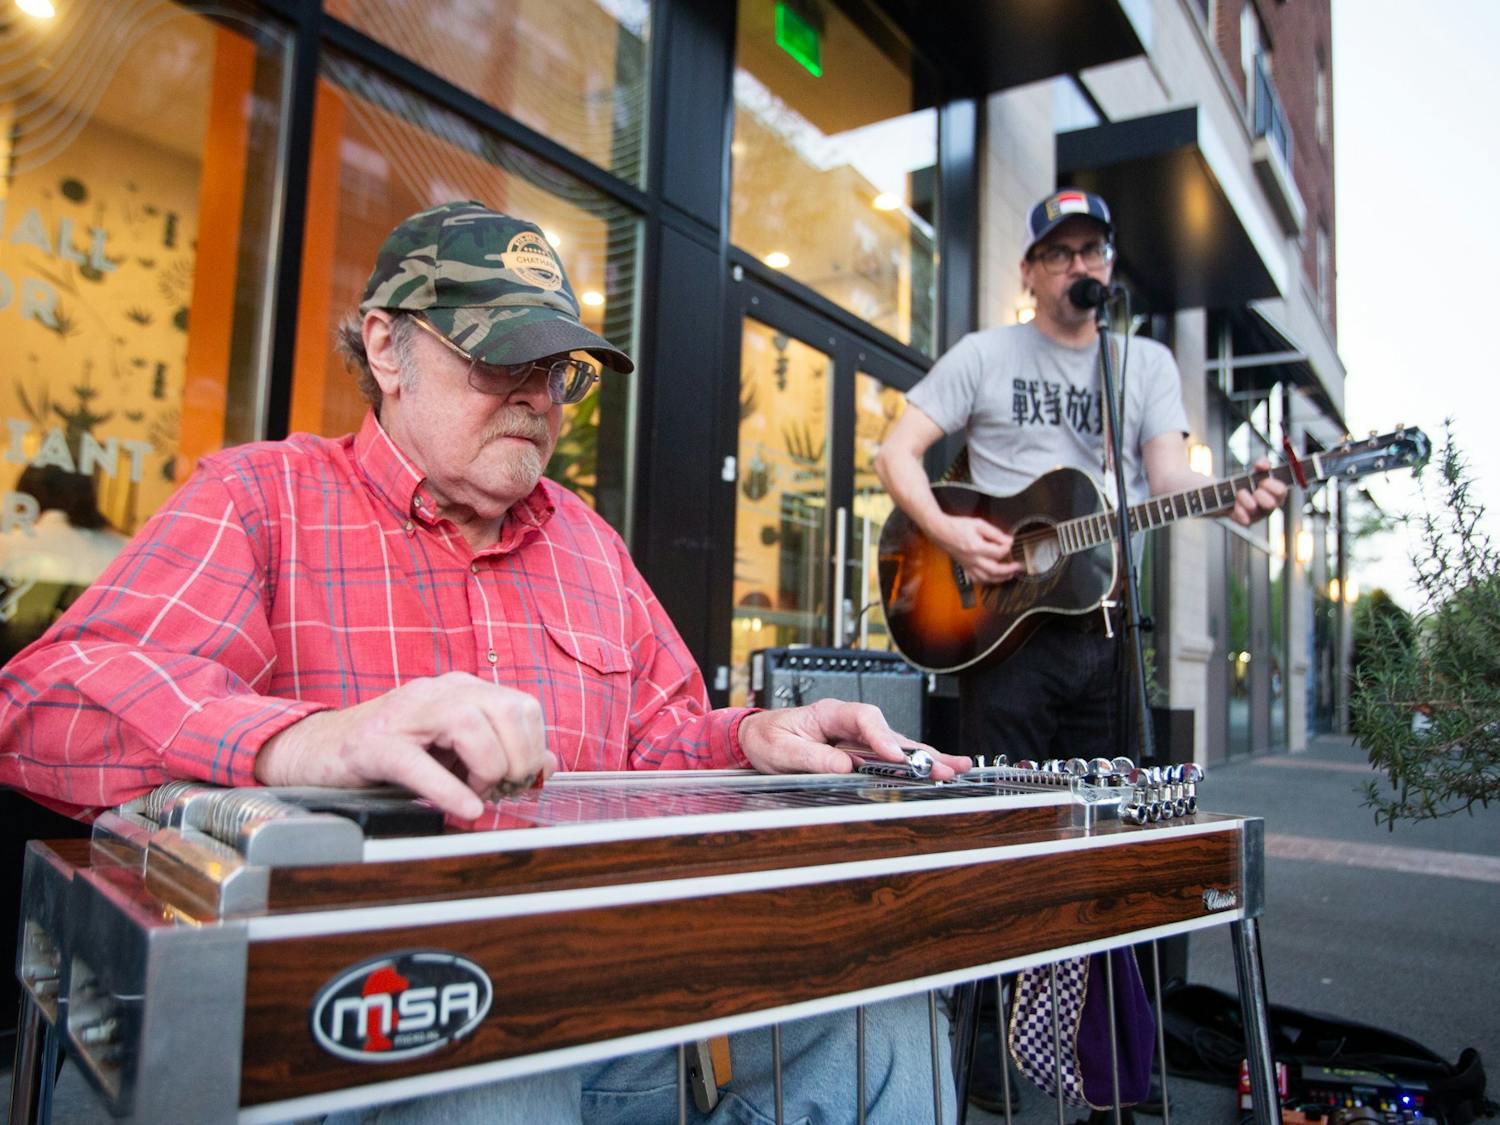 Musicians Clark Albert Blomquist and Steven Watson perform outside Roots Natural Kitchen on Franklin Street in Chapel Hill, N.C. on Saturday, April 1, 2023. The performance was part of the Downtown Live series, which features local musicians in outdoor settings in downtown Chapel Hill.